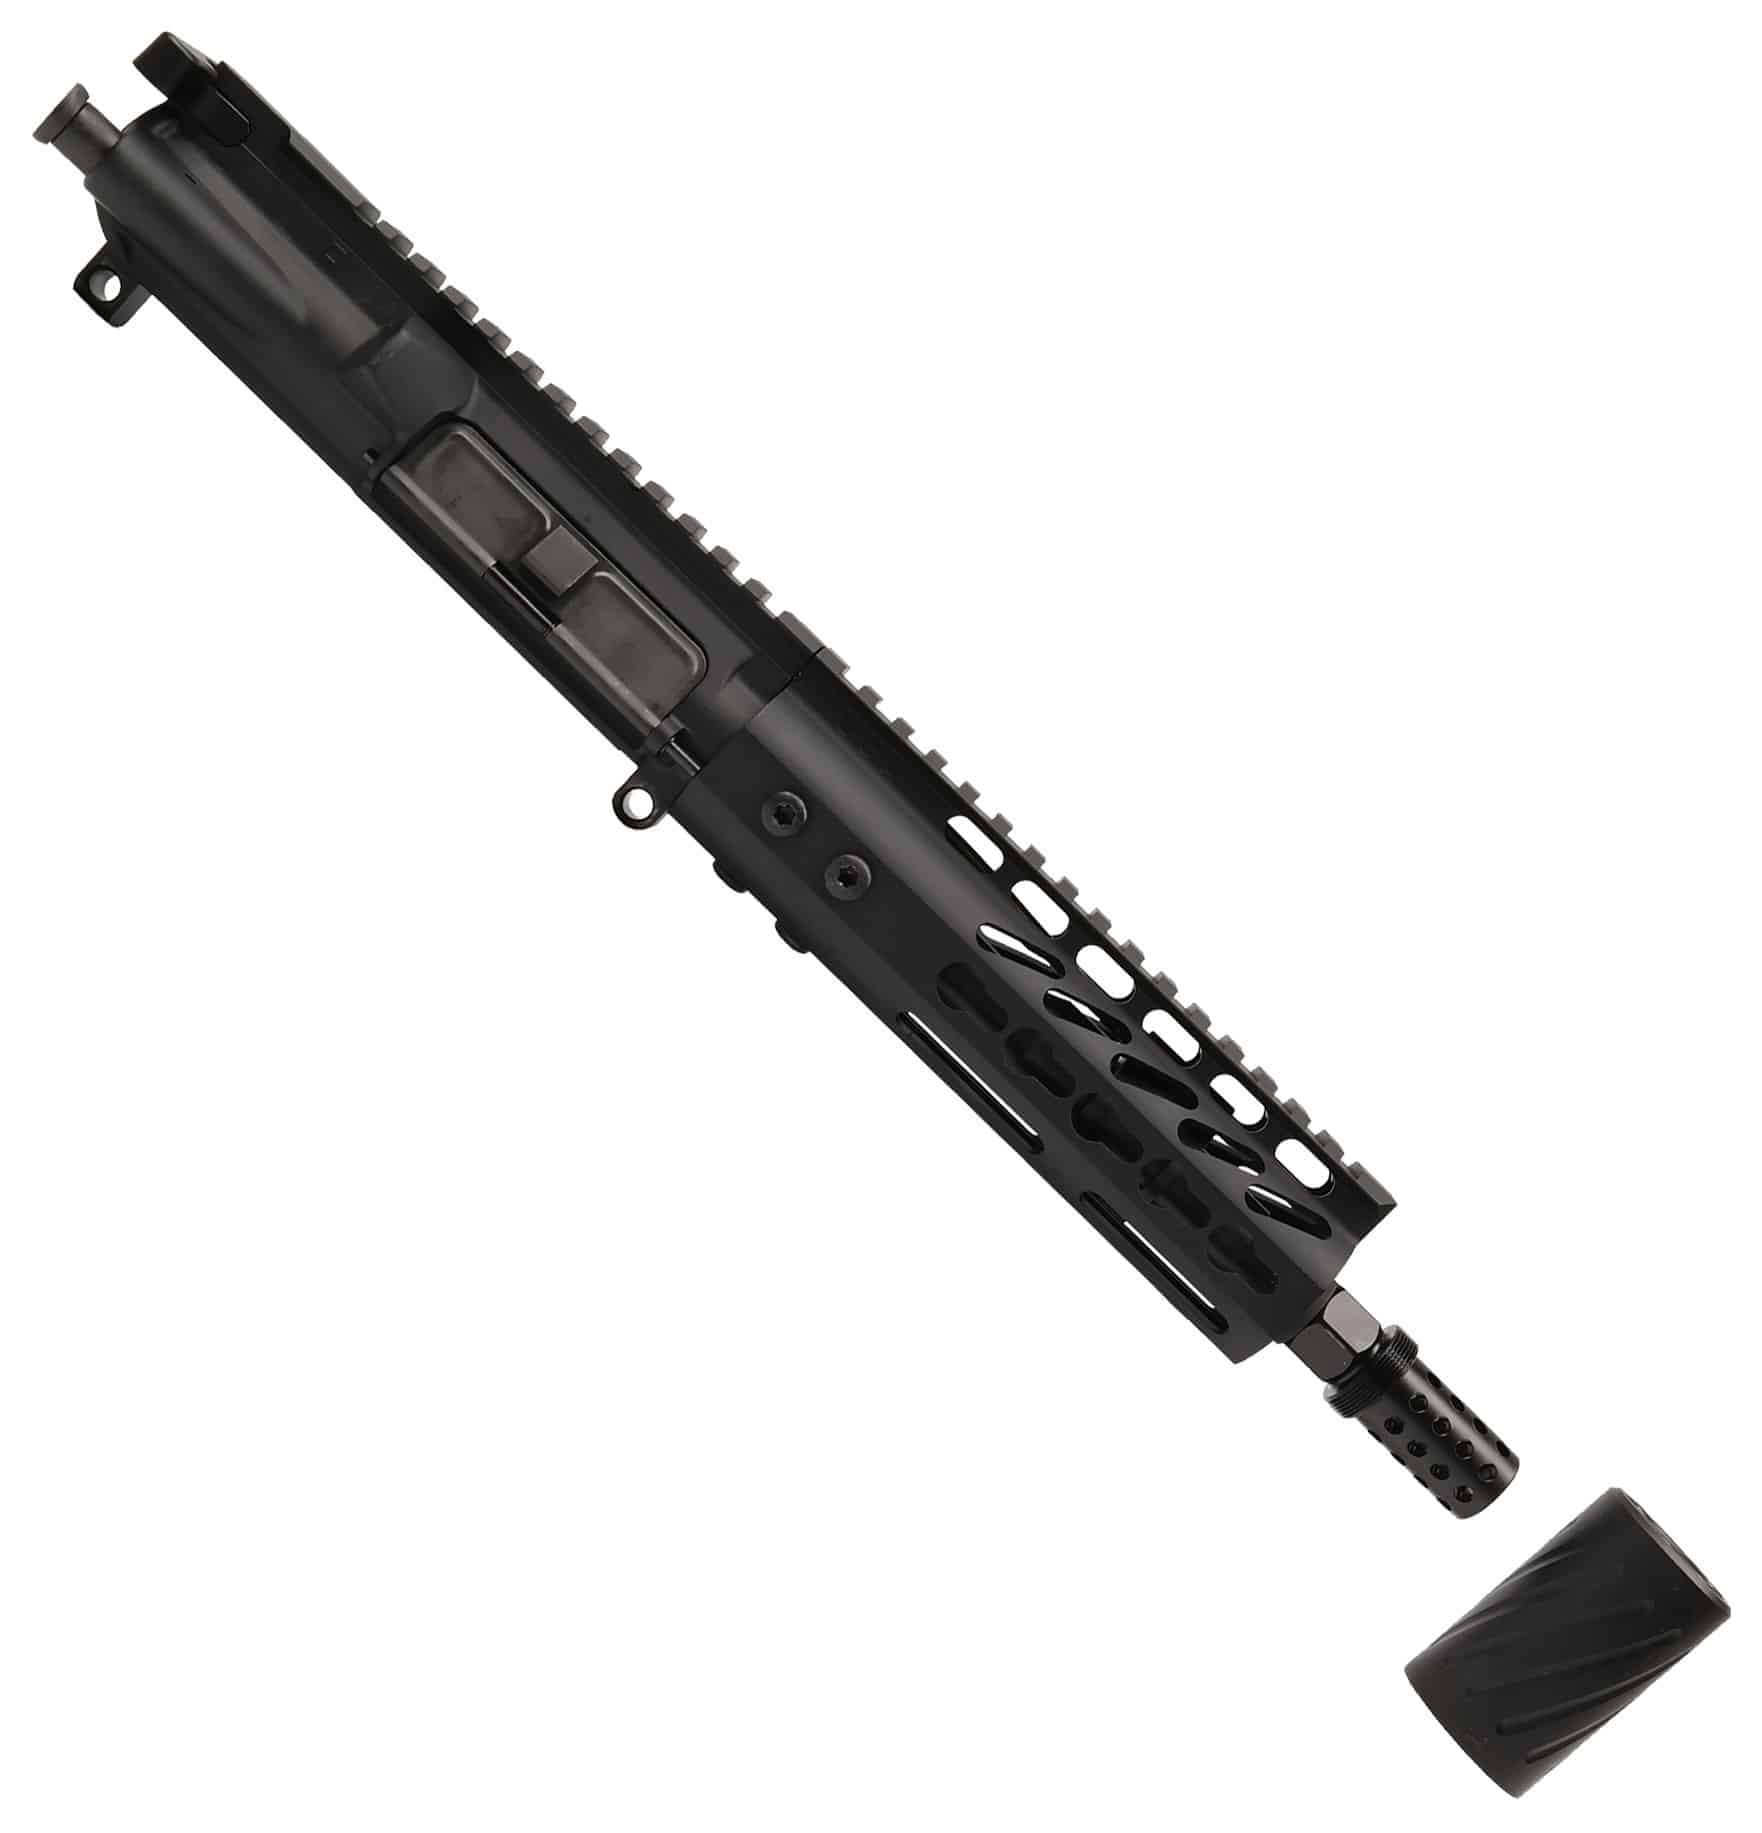 AR-15 5.56 Pistol Upper Assembly with 6.75" KeyMod Handguard and MCBS System